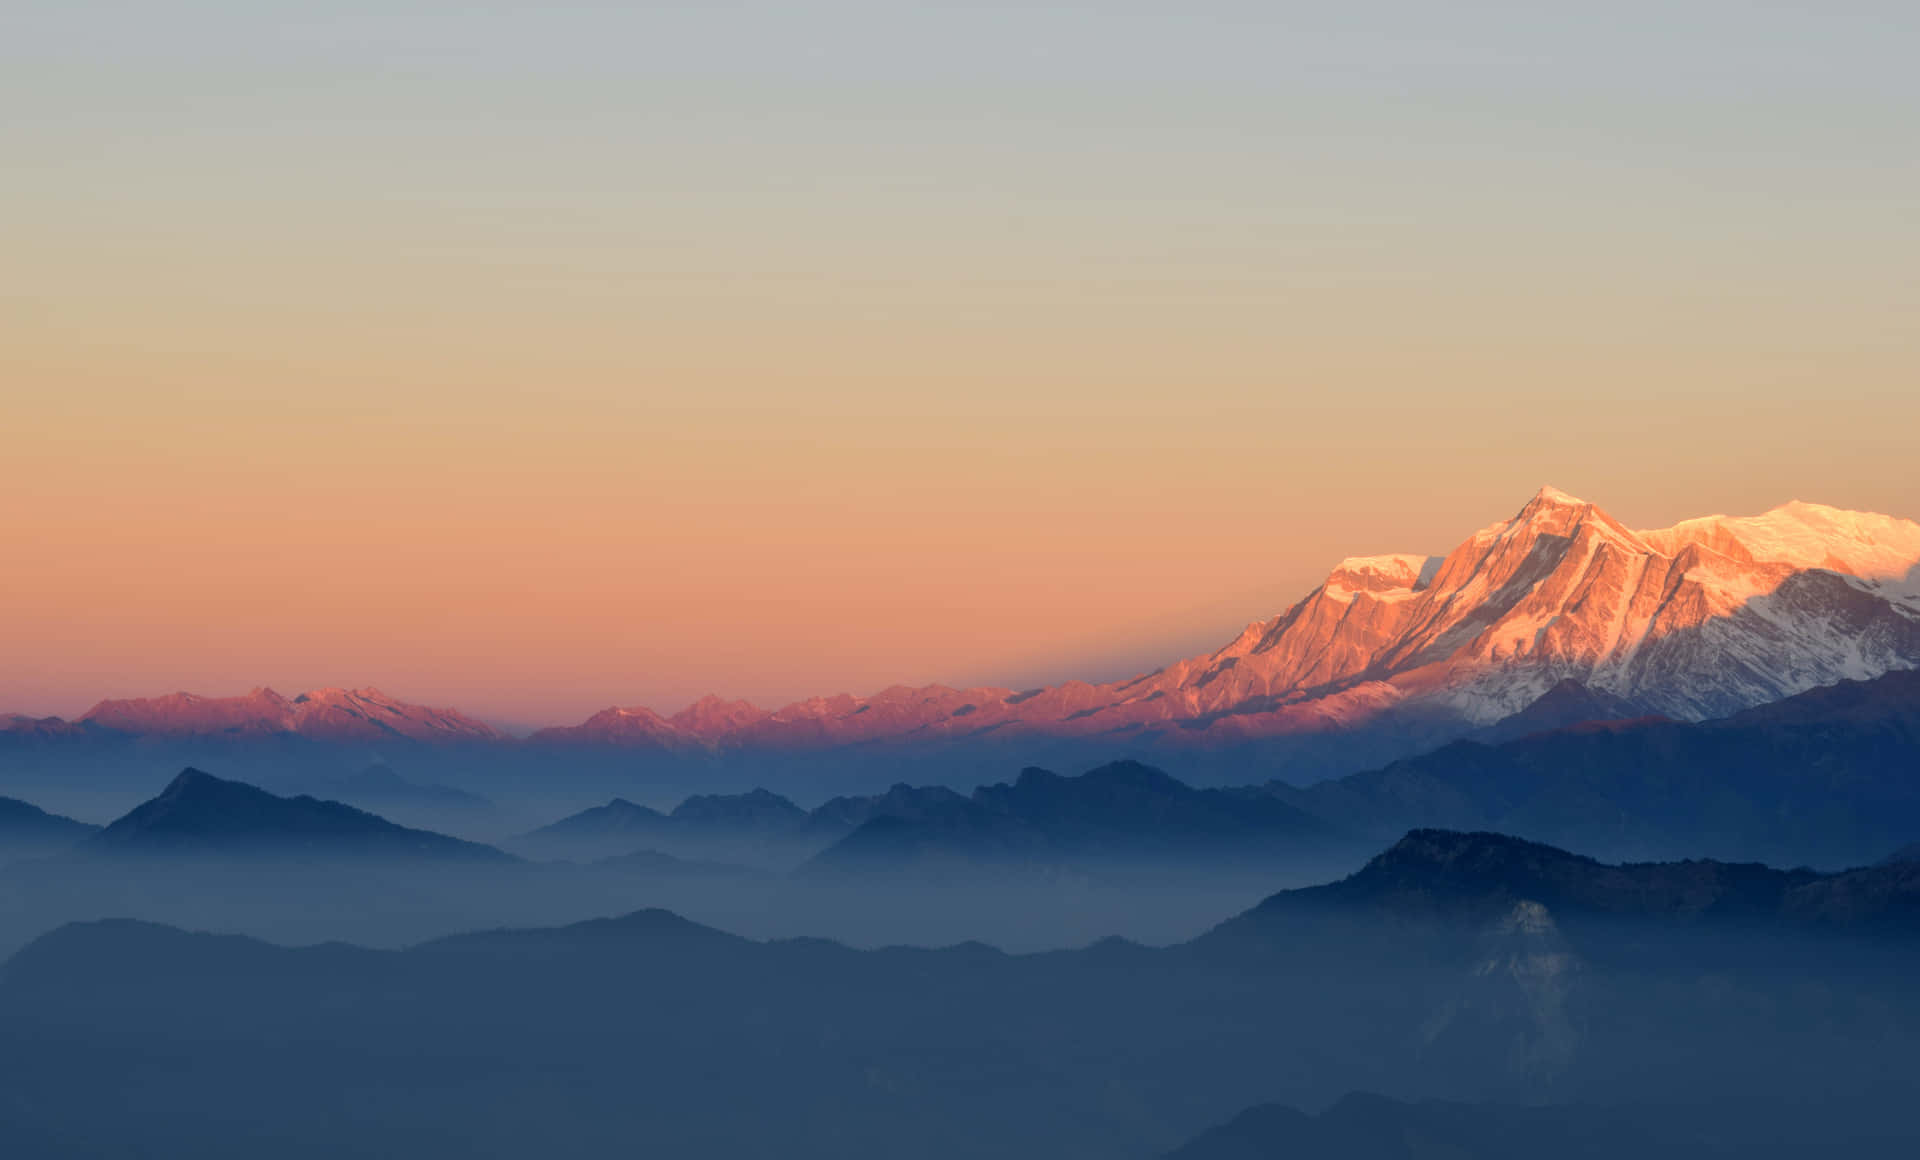 Enjoy a breathtaking view of the majestic Himalayan mountains